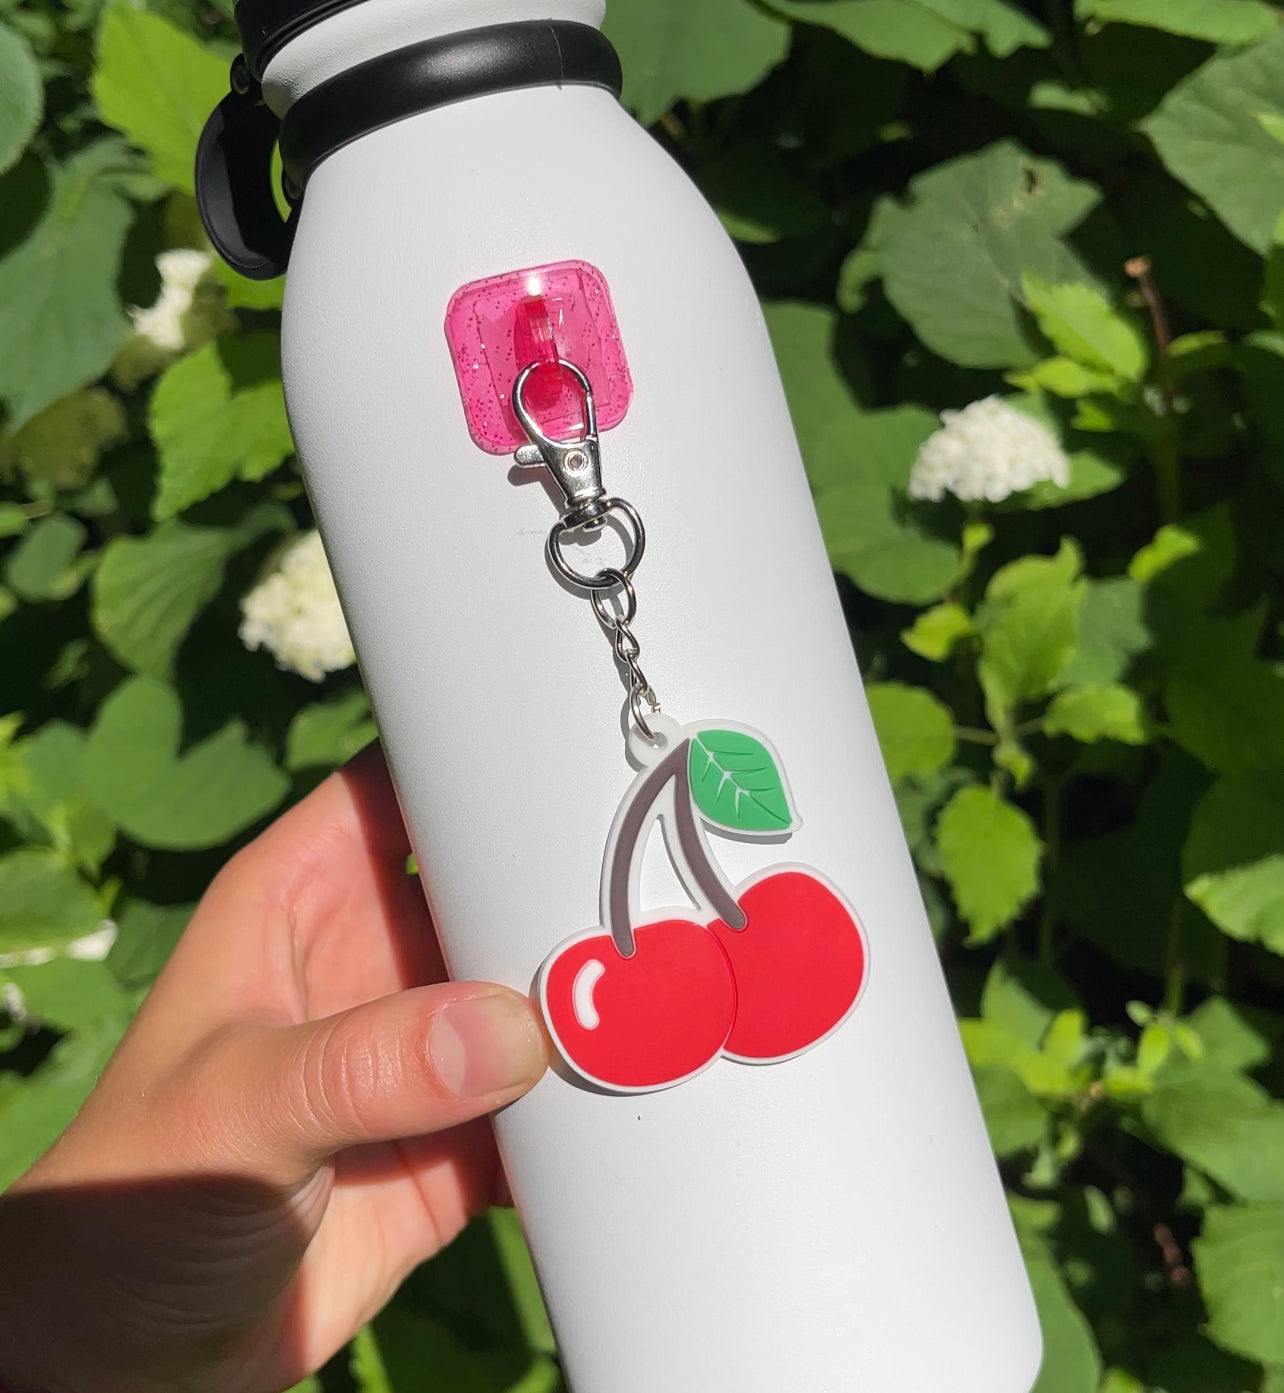 CharCharms Water Bottle Accessory